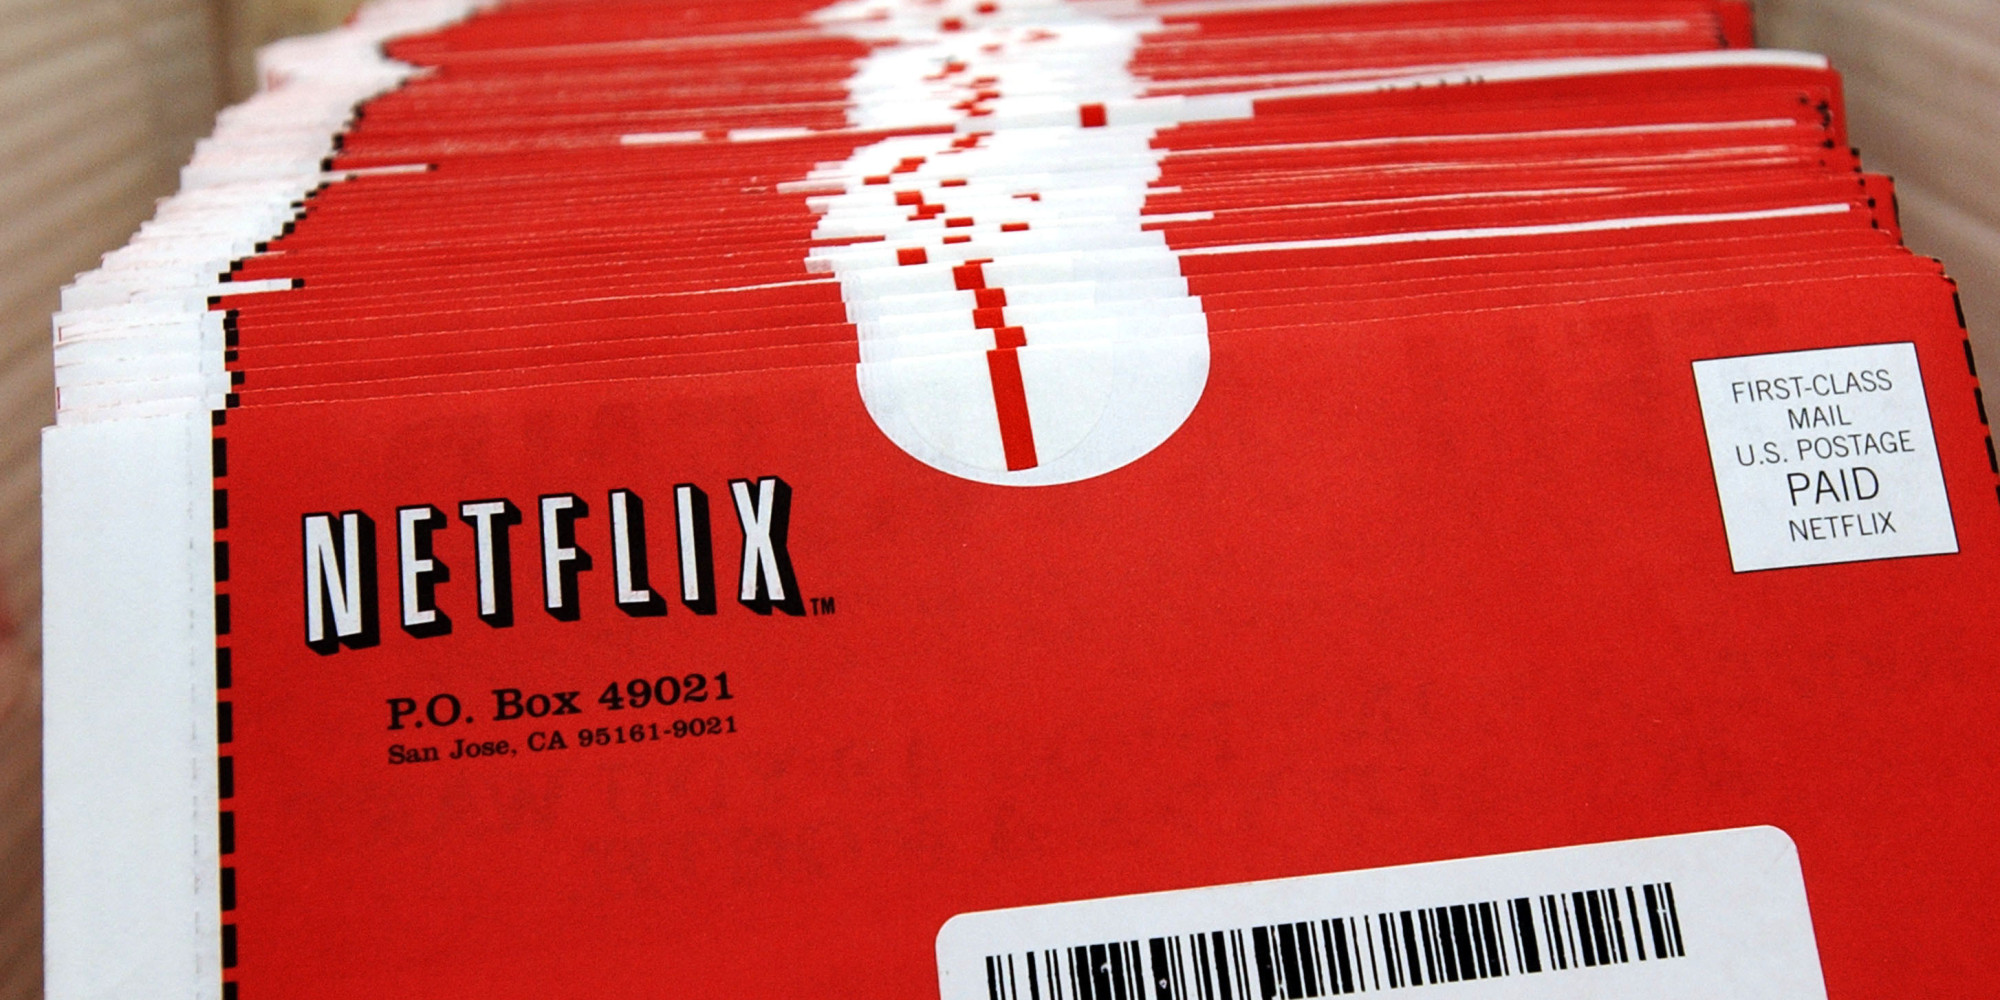 Netflix's DVD rental by mail service generated $212 million in revenue last year